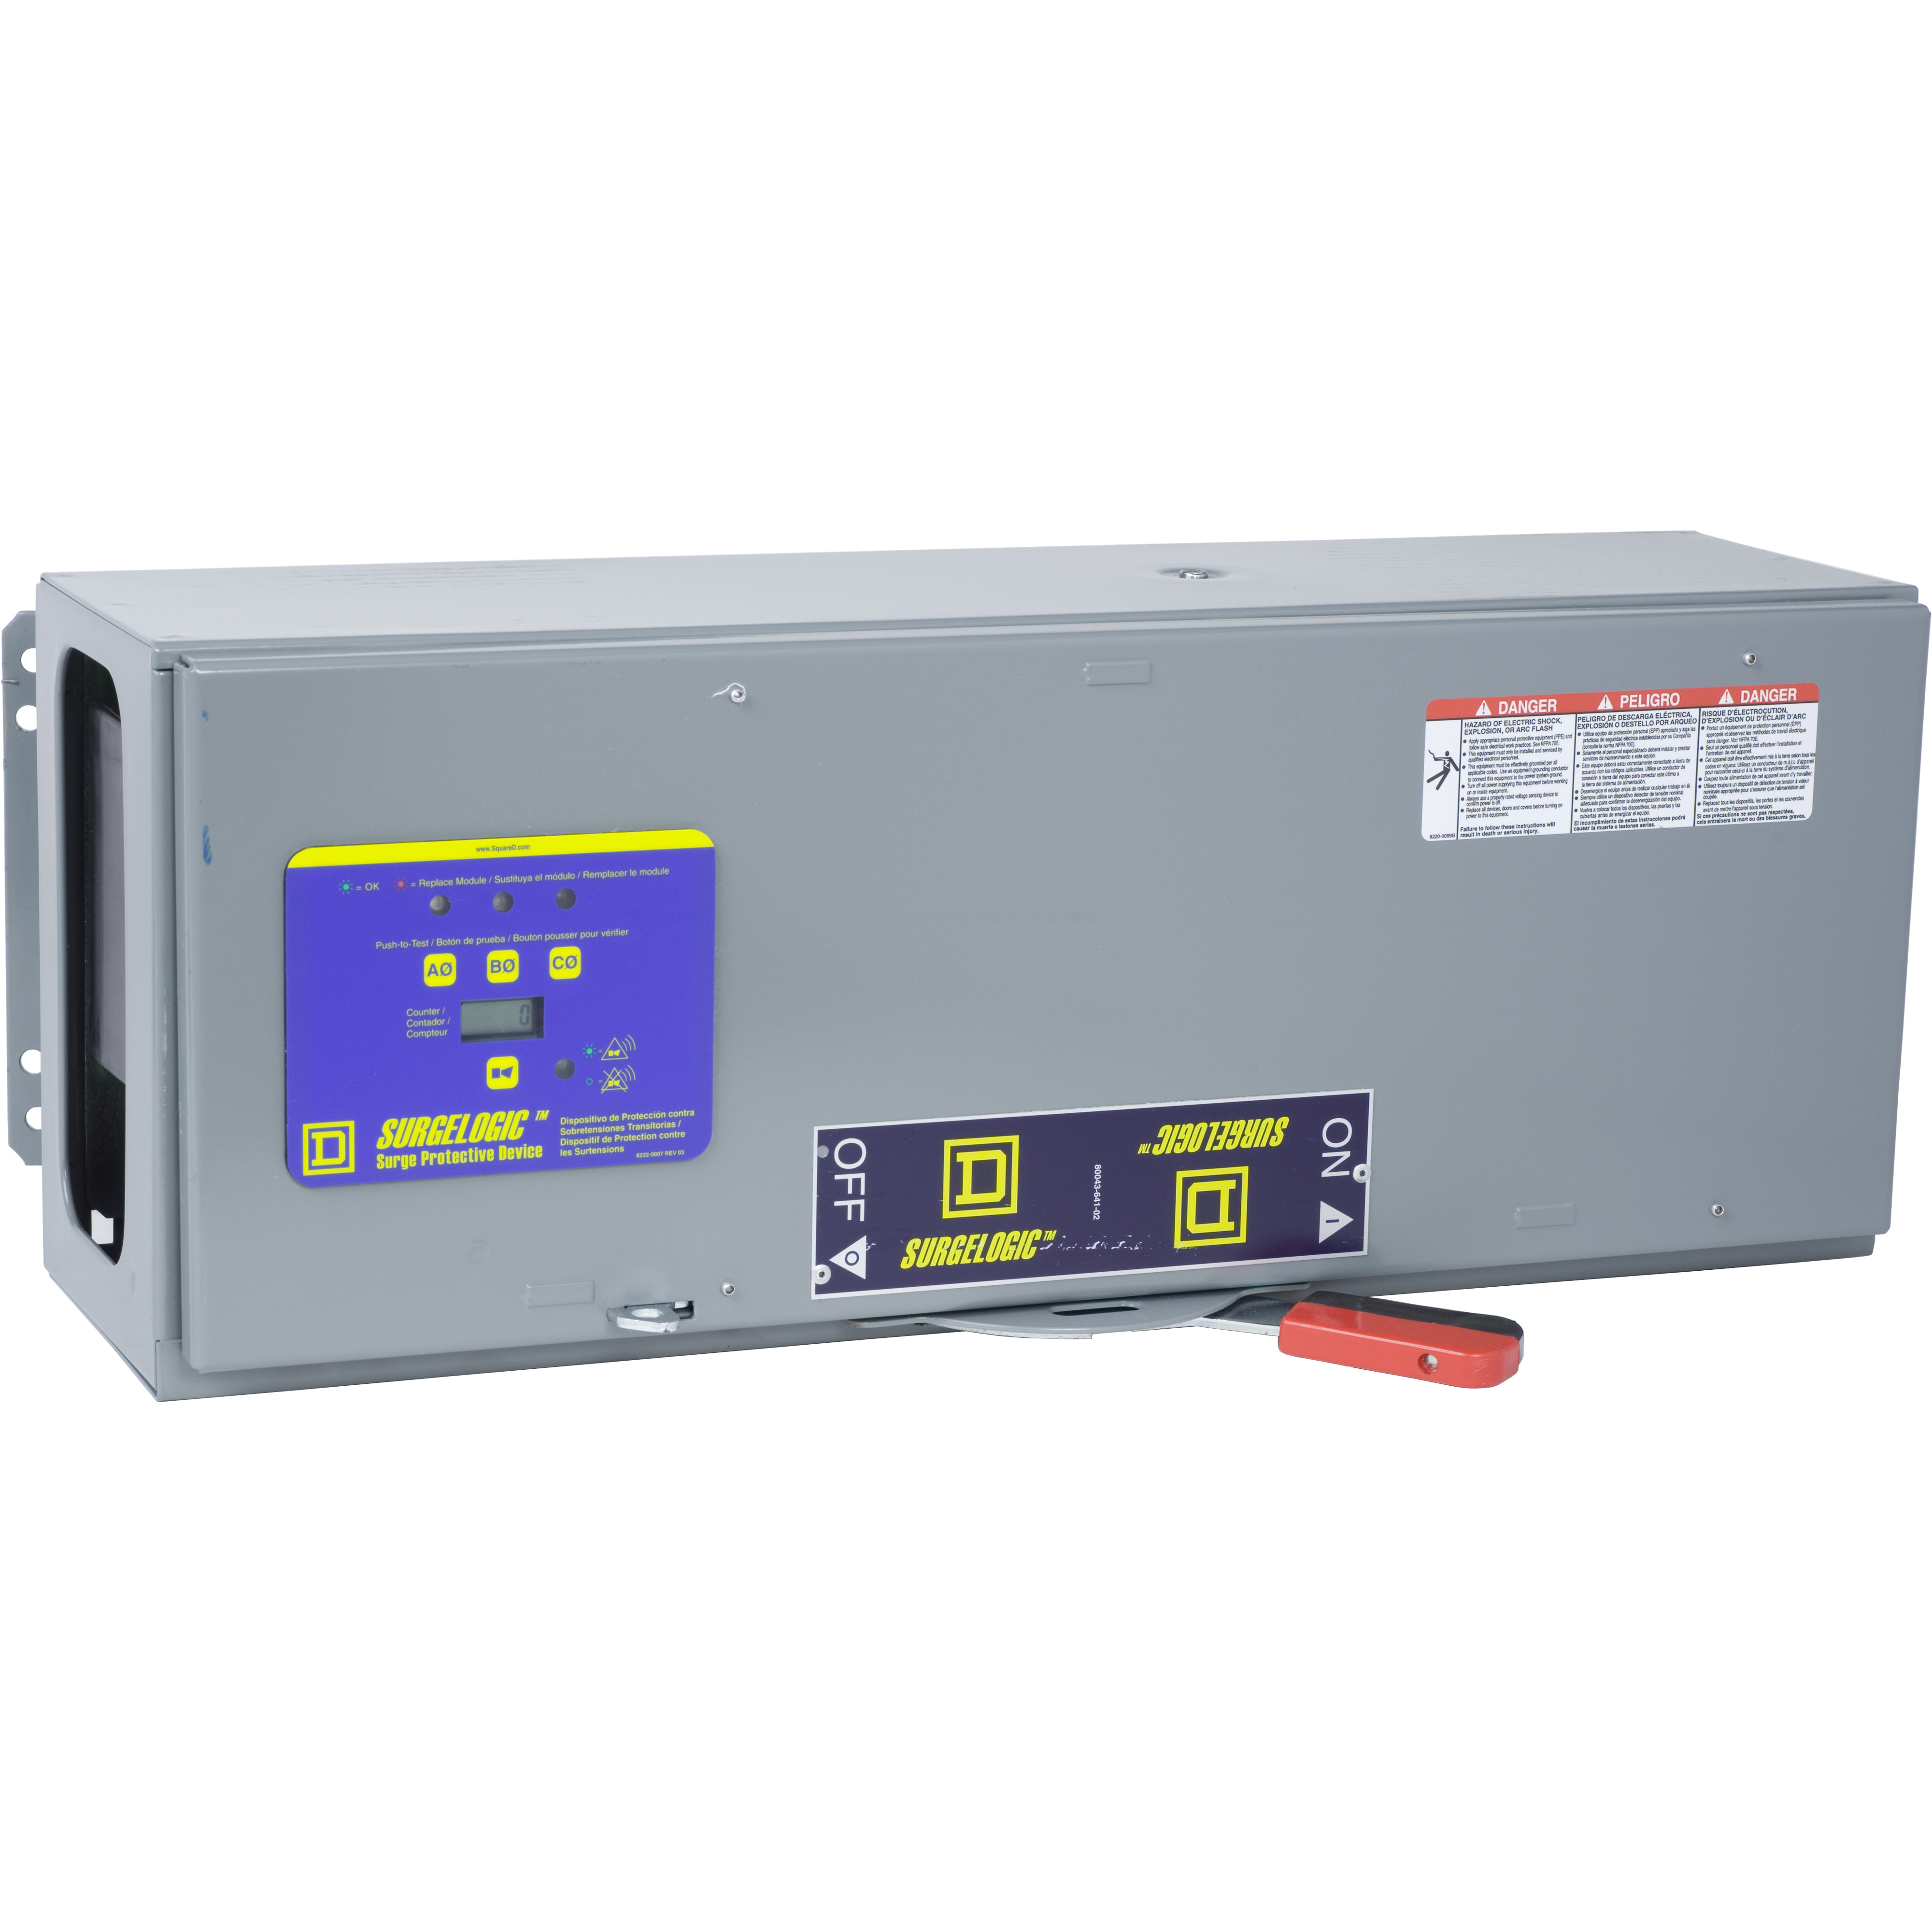 Surge protection device, Surgelogic, QMB, 120kA, 120/240 VAC, 3 phase, 4 wire, SPD type 2